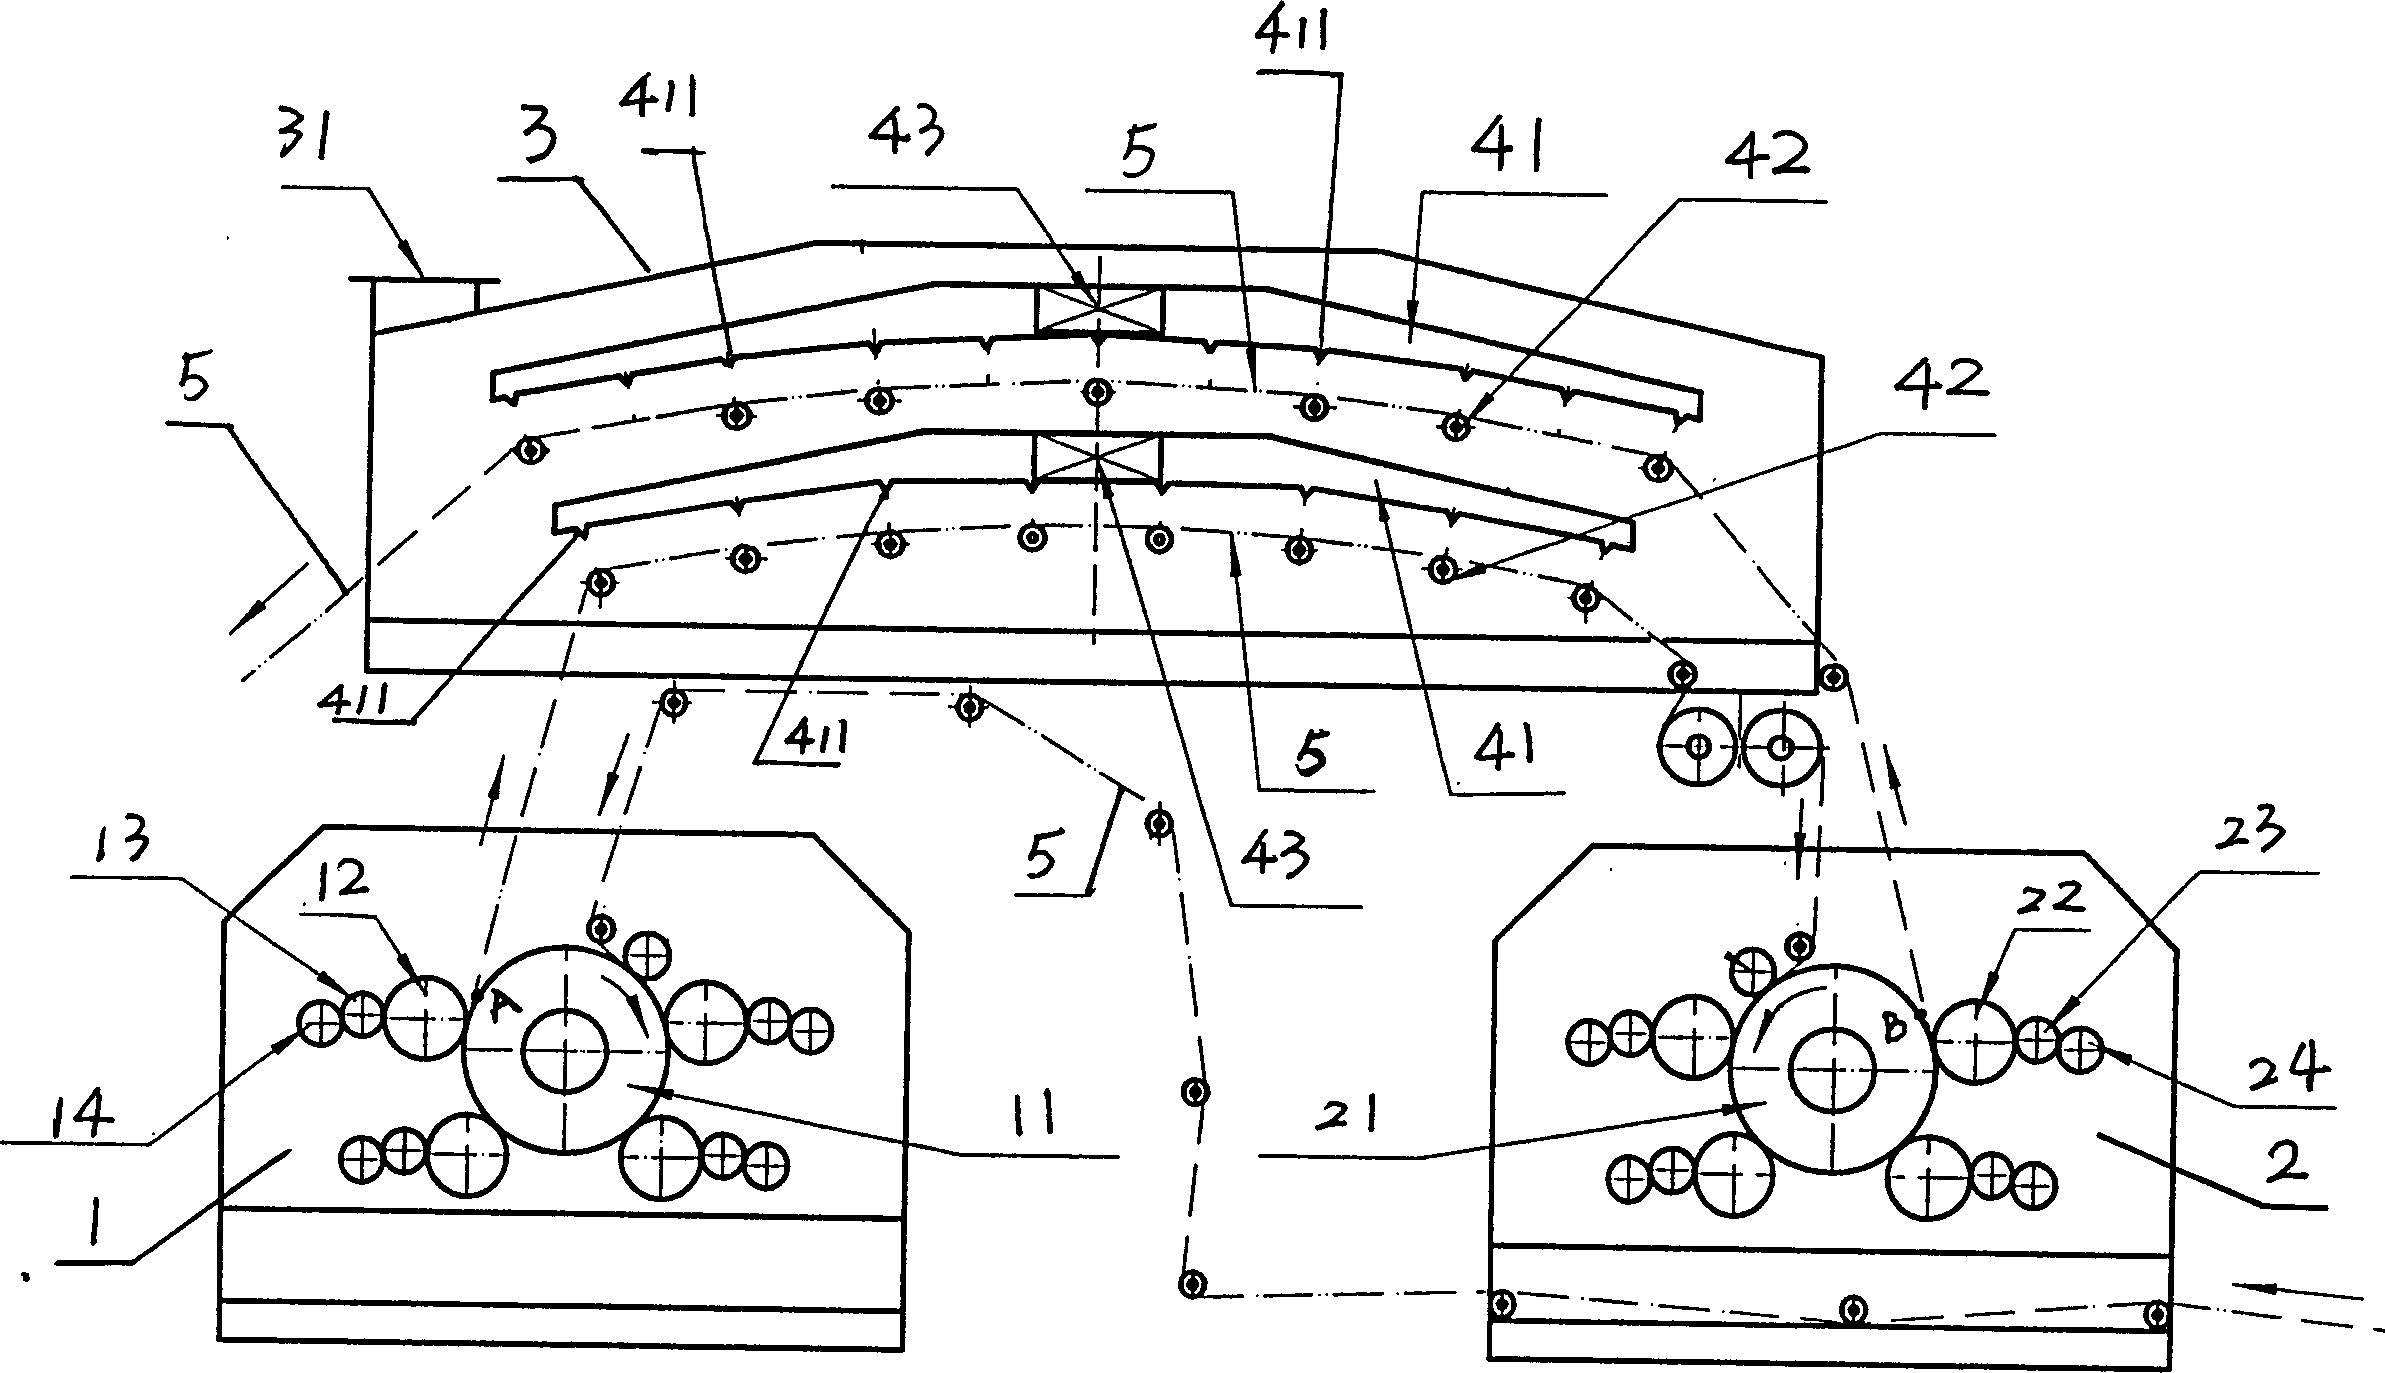 Double face printing apparatus and double face printing process